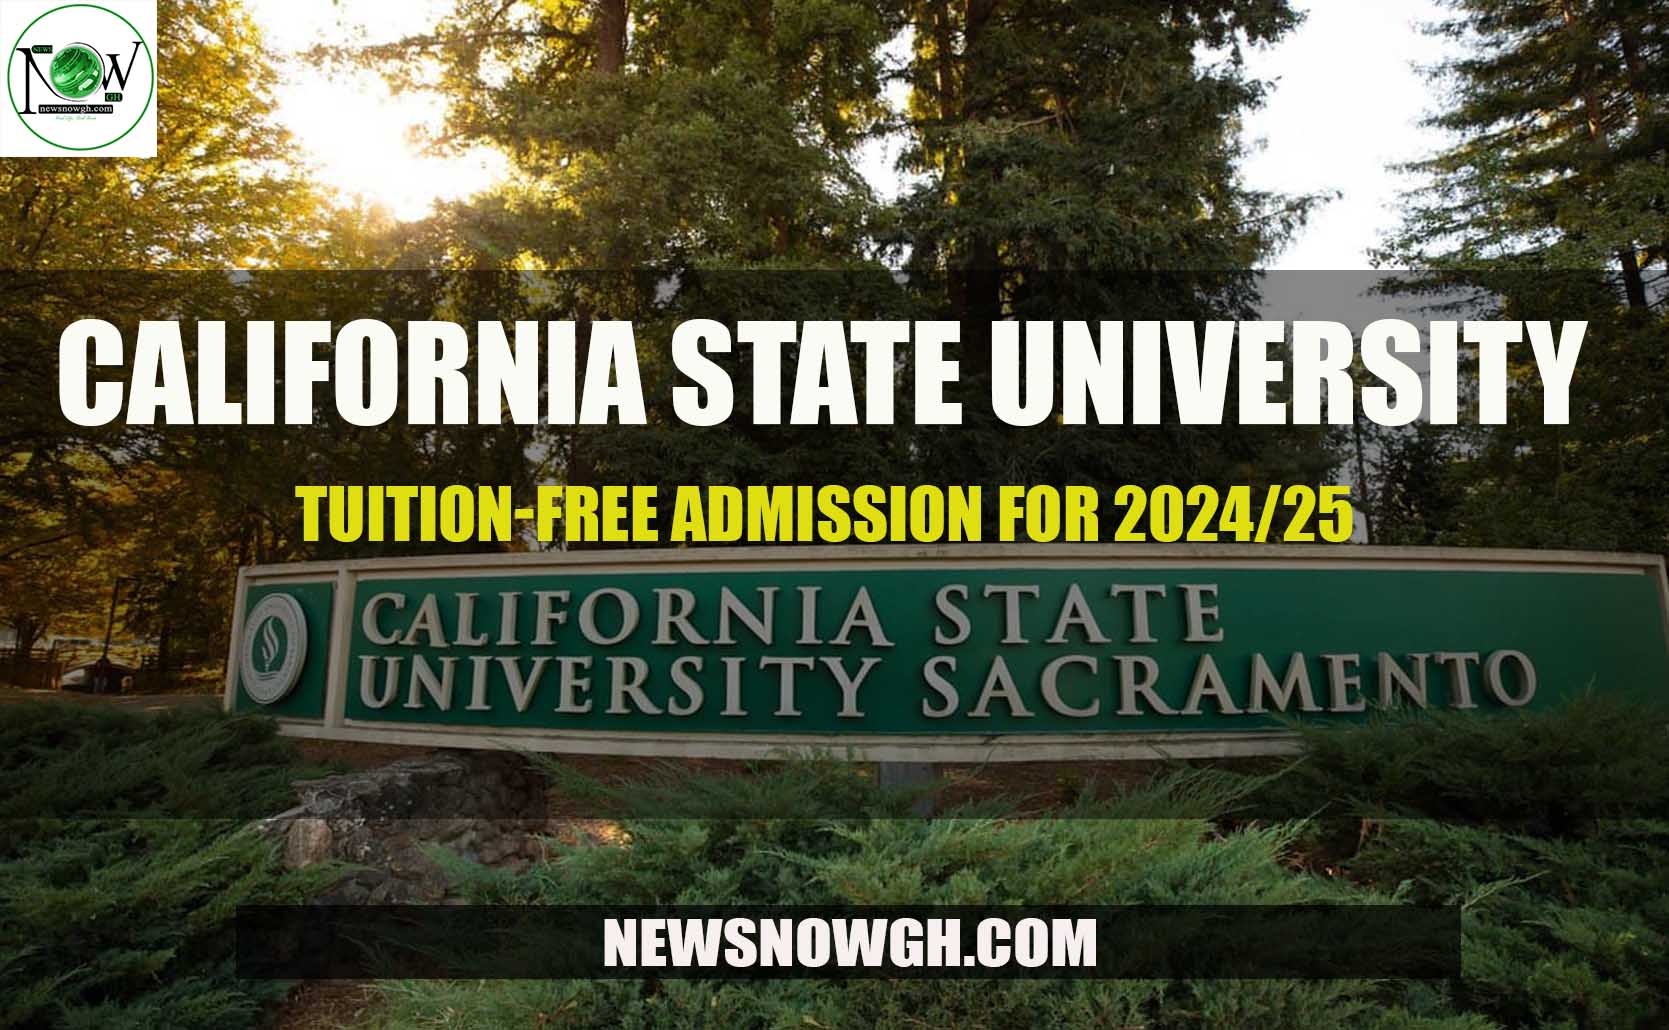 202425 California State University tuitionfree admission